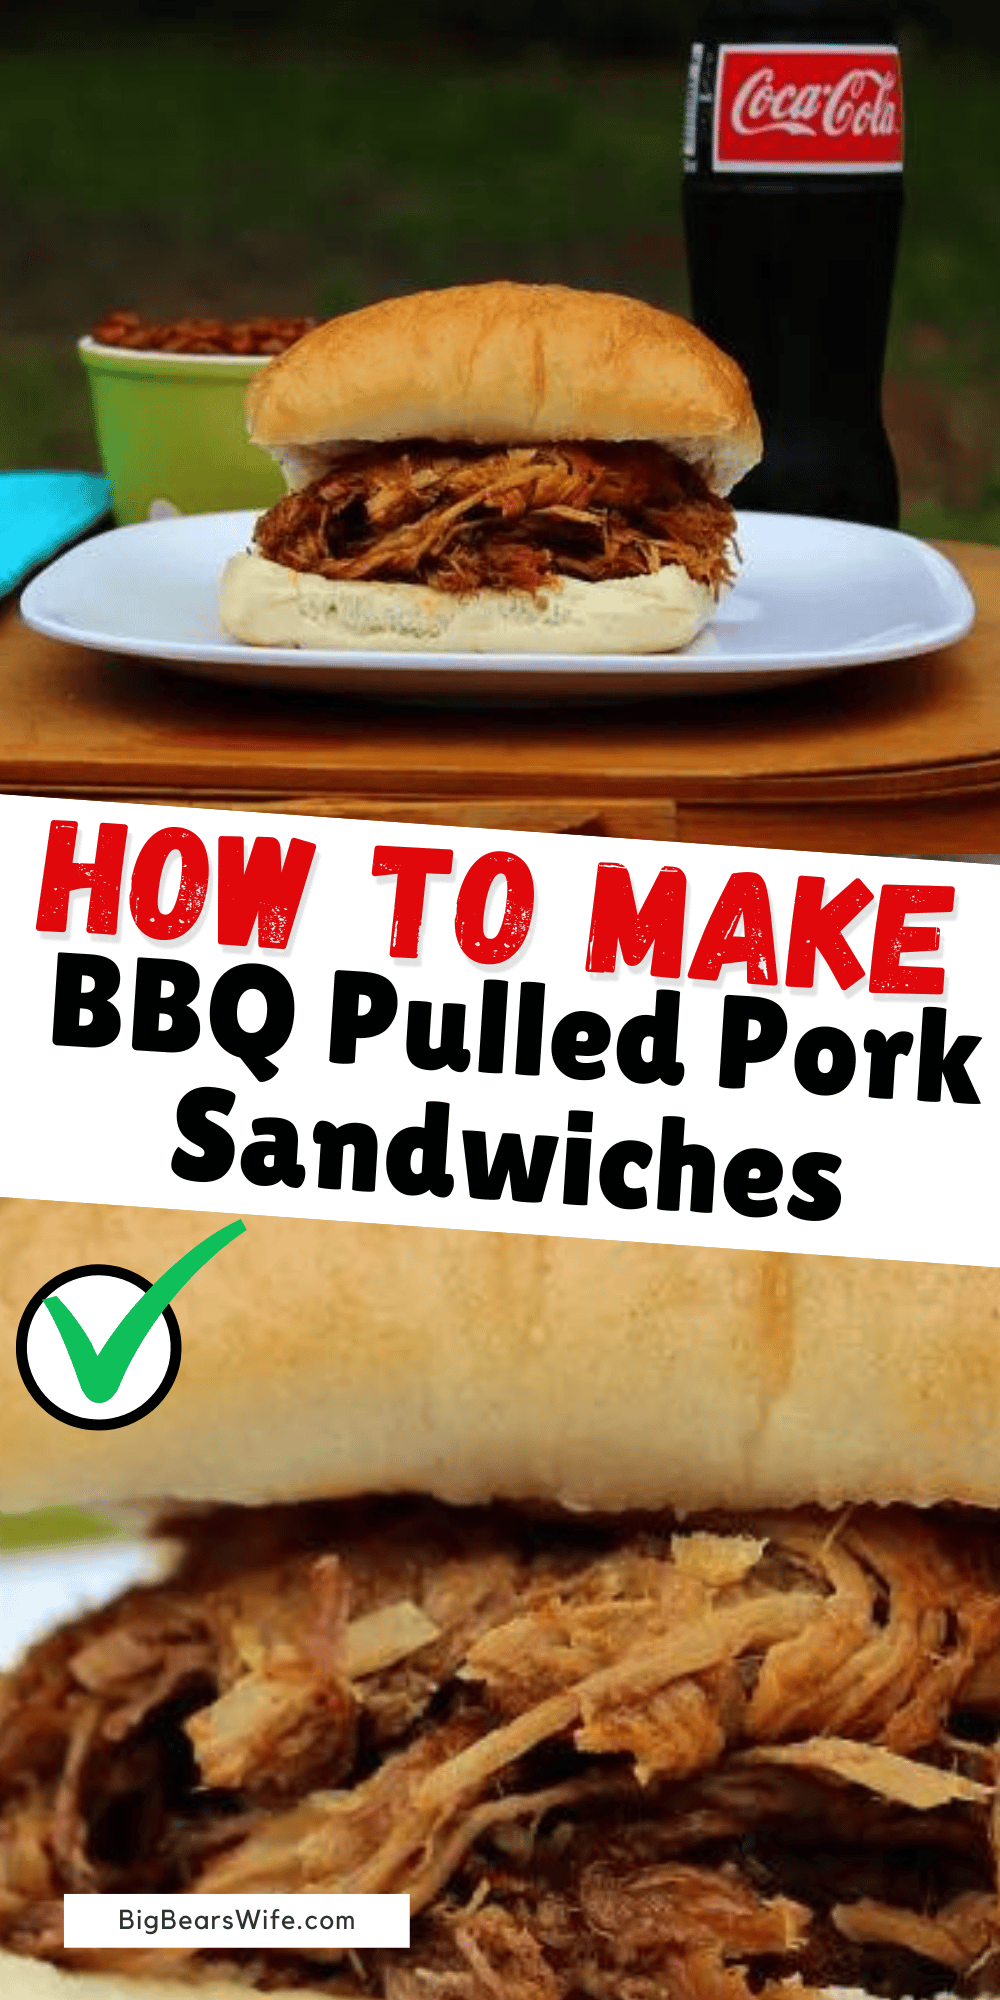 BBQ Pulled Pork (for sandwiches) - Super Easy BBQ Pulled Pork Recipes! Slow Cooker / Crock Pot is doing all of the work for this recipe!  via @bigbearswife